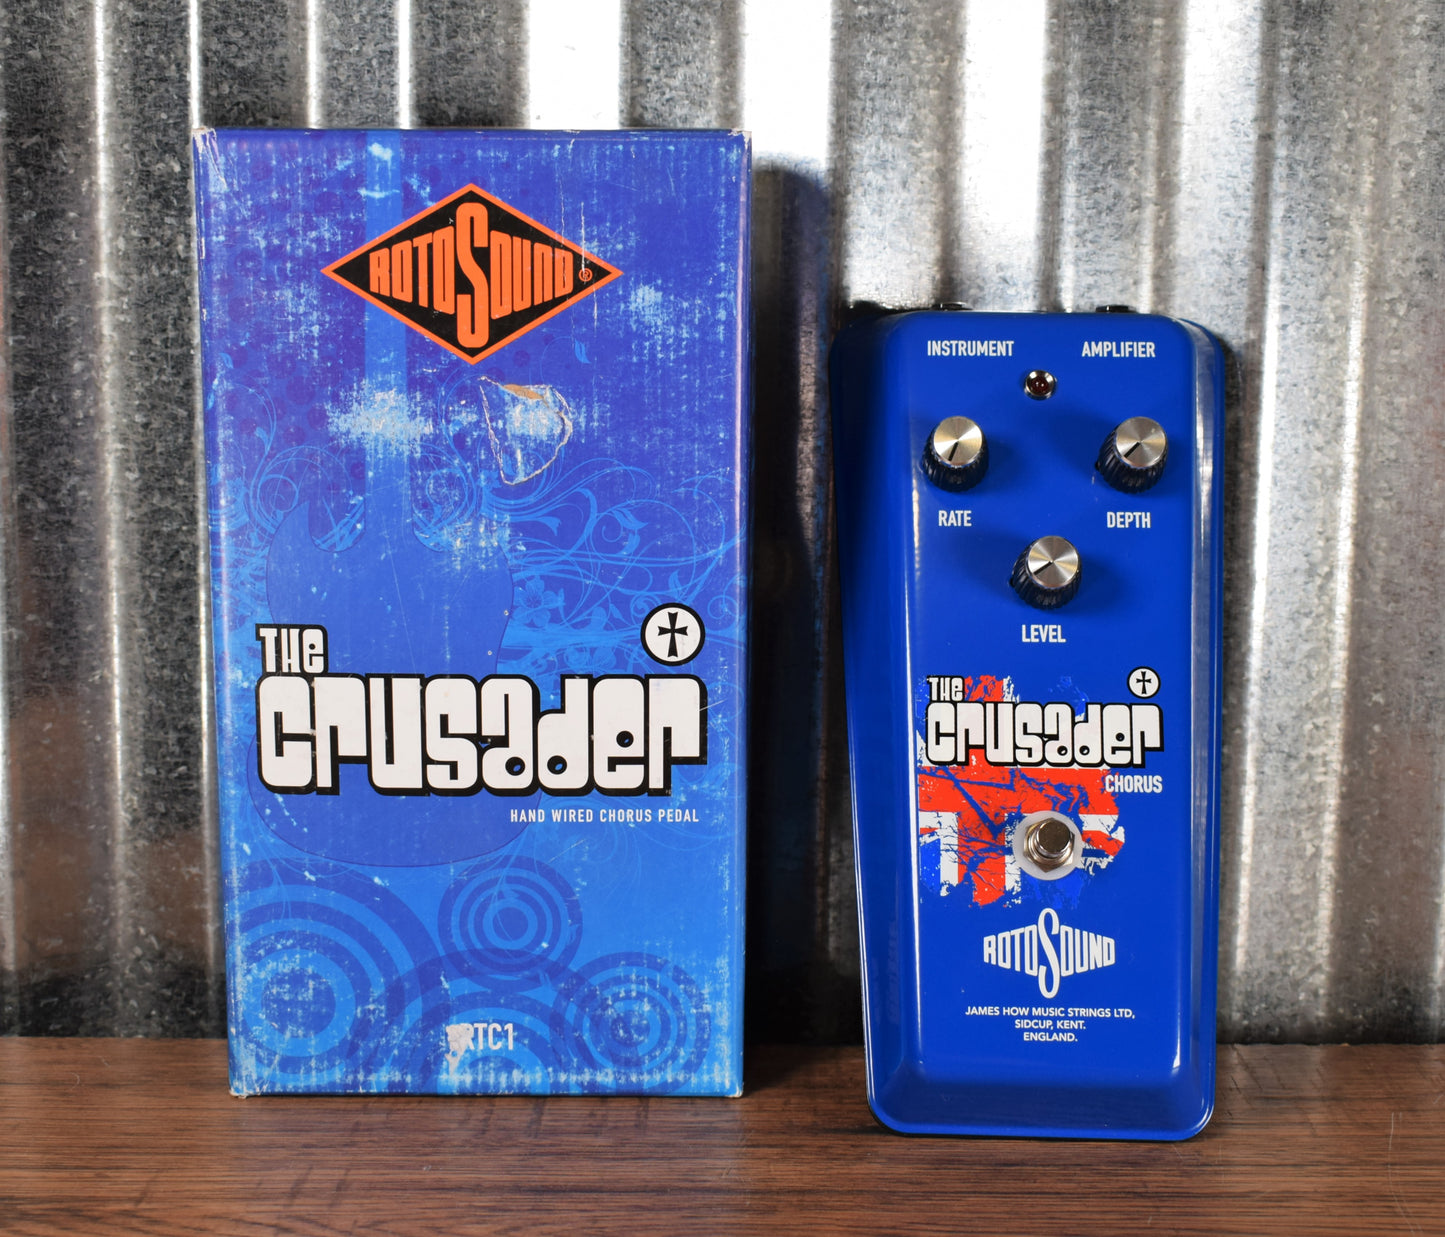 Rotosound The Crusader RTC1 Chorus Hand Built Vintage Style Guitar Effect Pedal Non Functioning